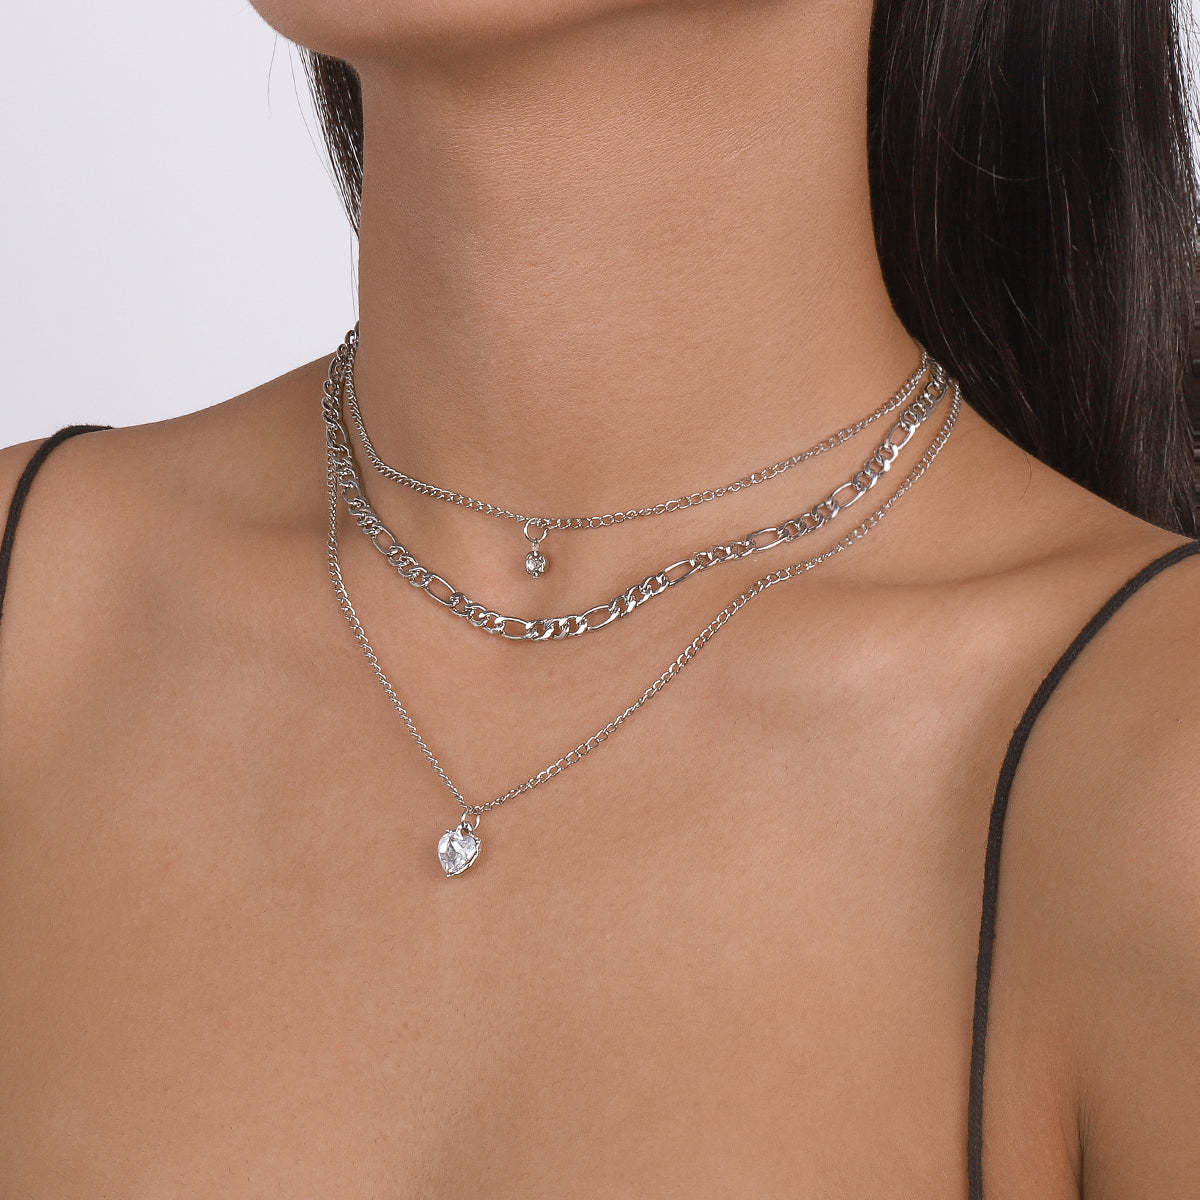 Cubic Zirconia & Silver-Plated Heart Pendant Layered Necklace Set - $13.99